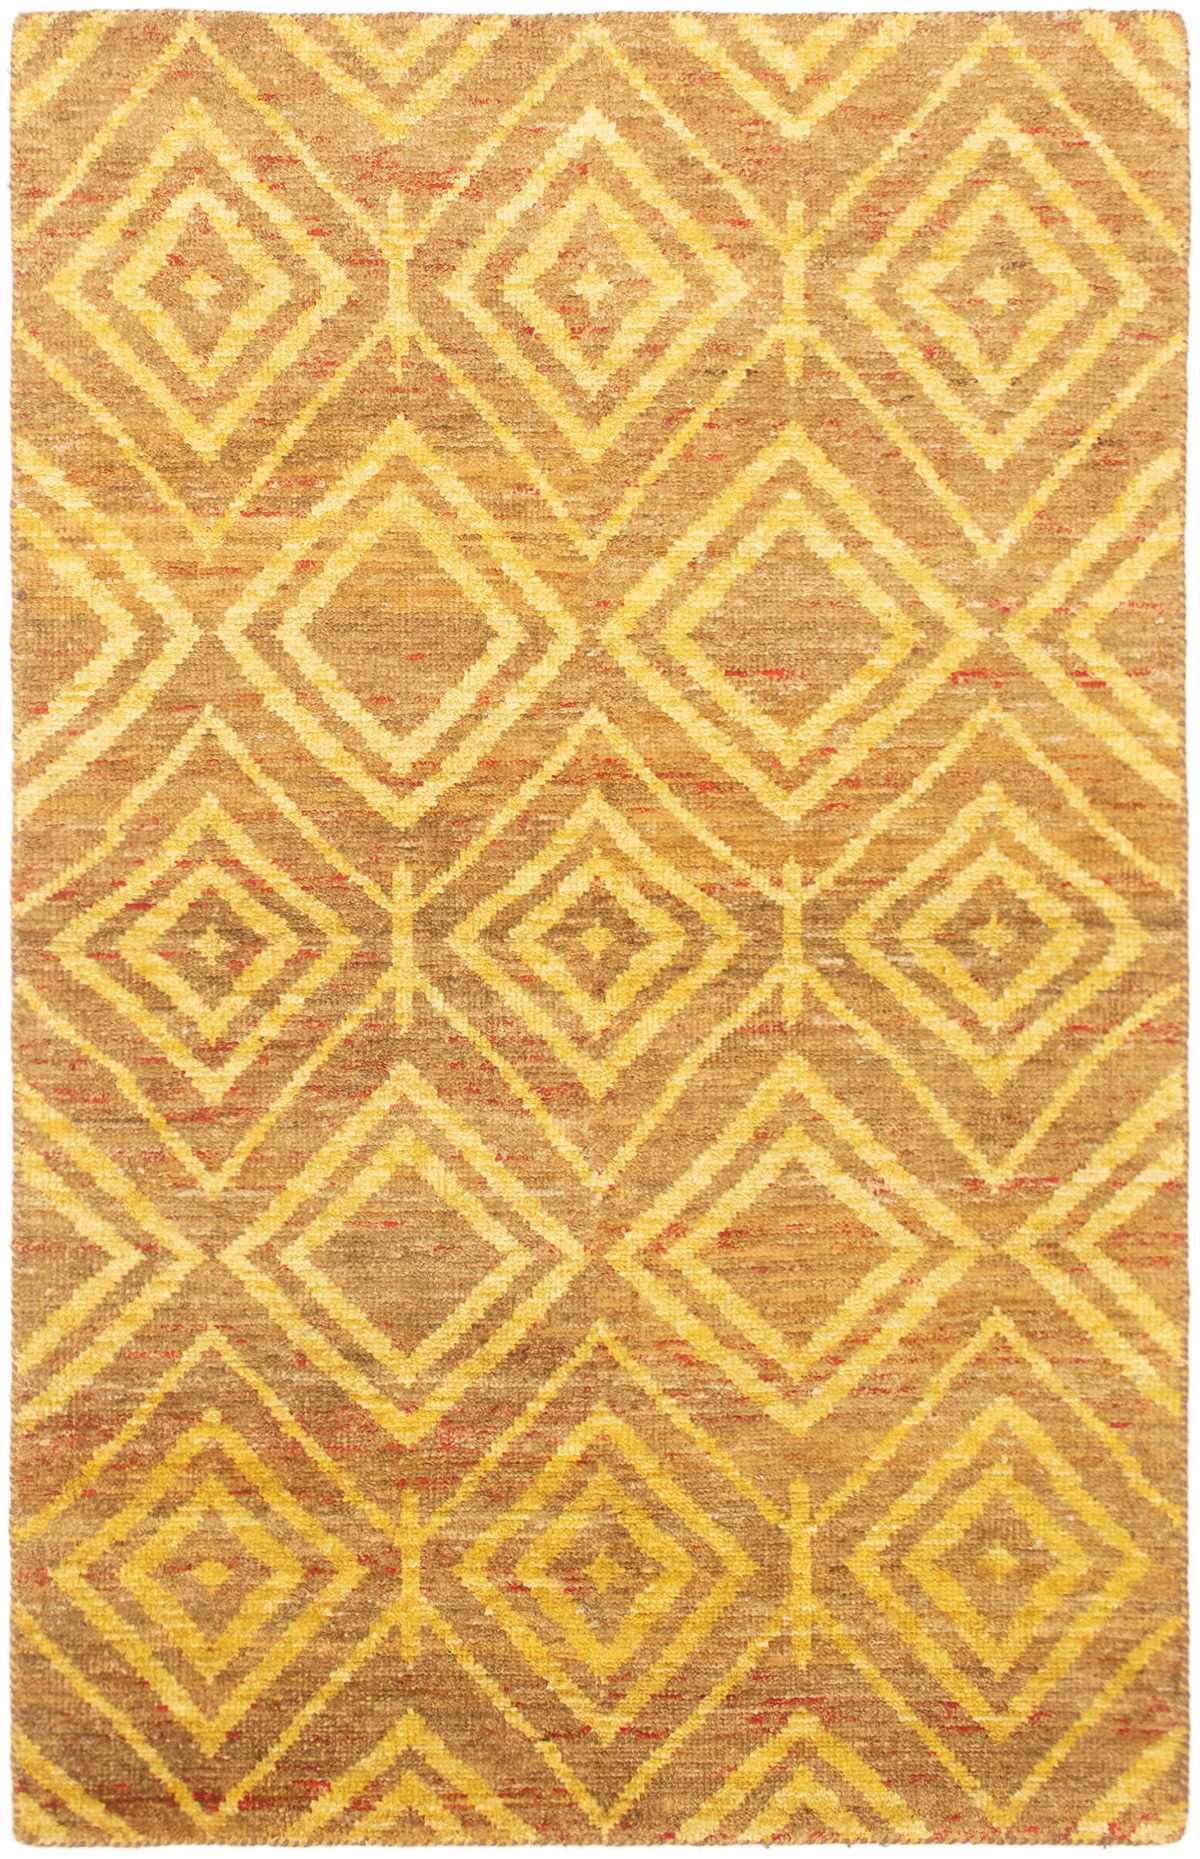 Hand-knotted Color transition Dark Gold  Rug 5'0" x 7'10" Size: 5'0" x 7'10"  